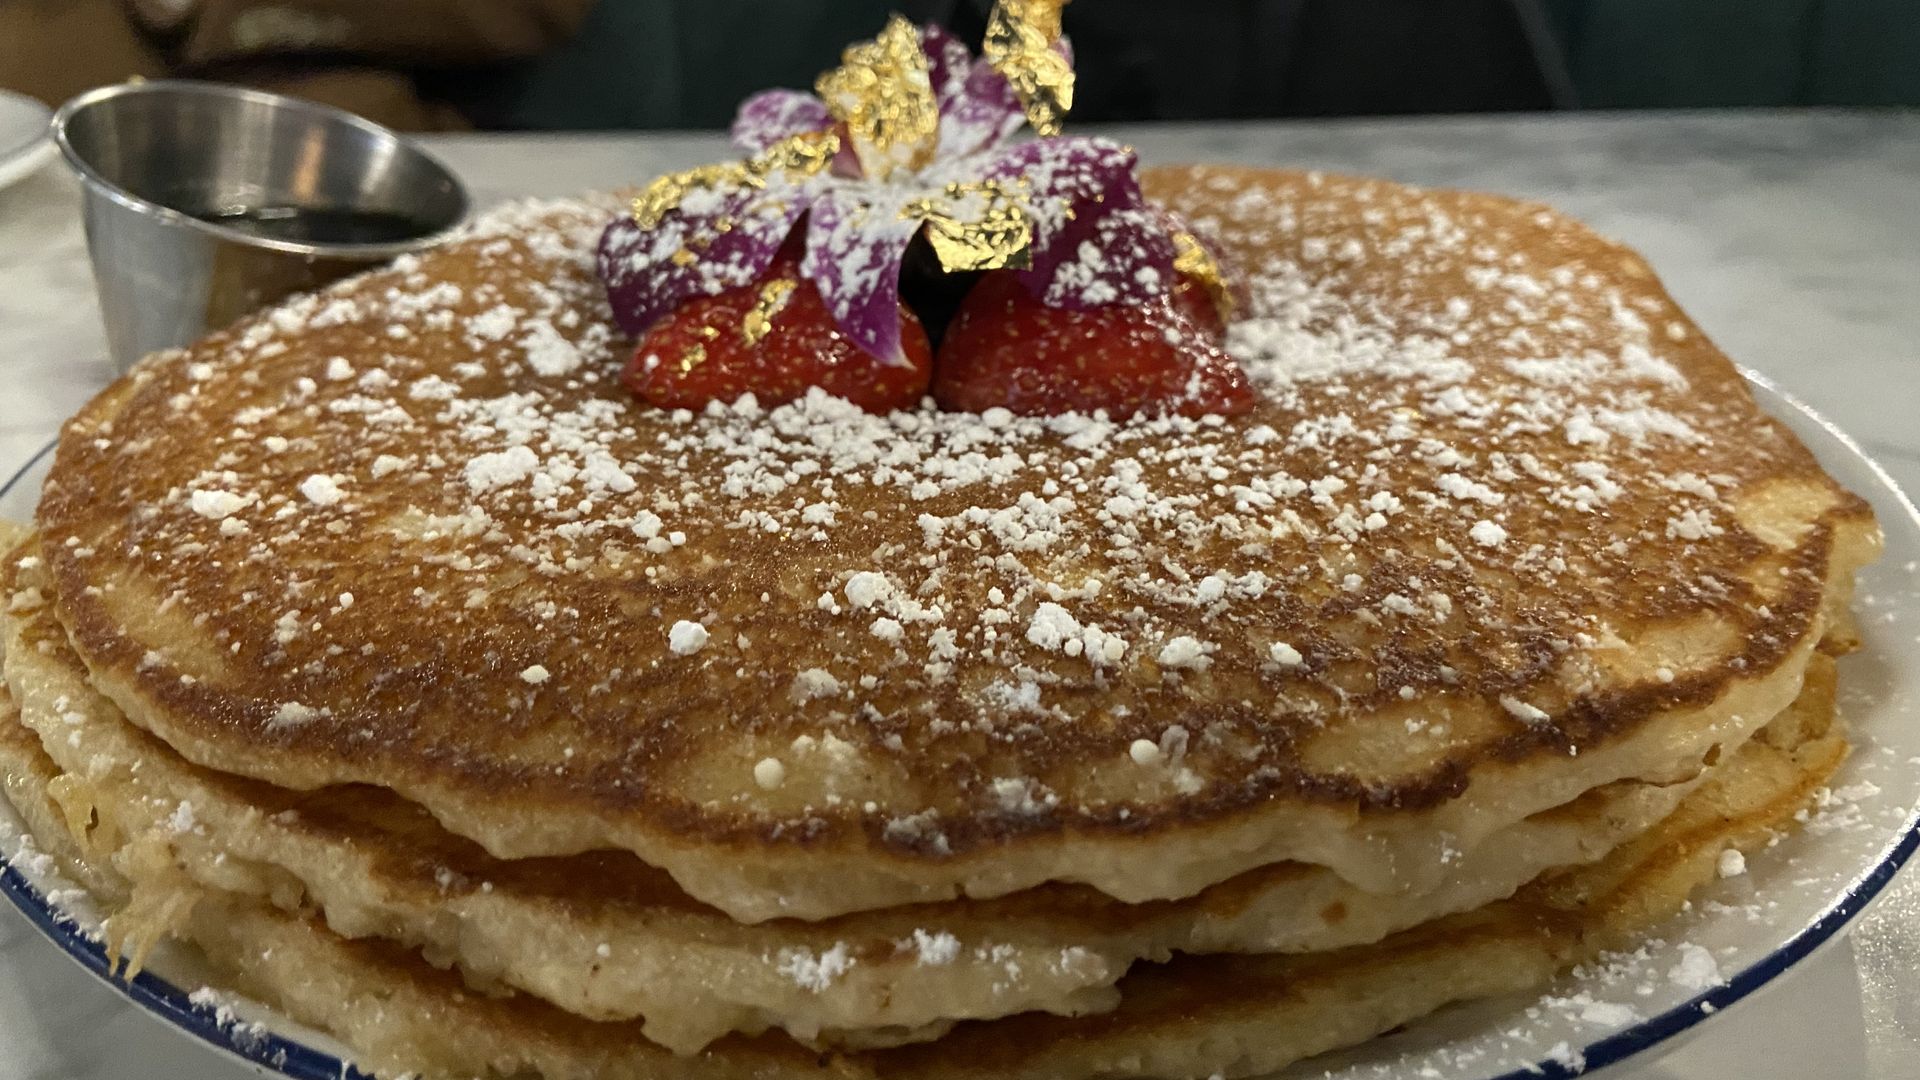 A photo of extra large pancakes, topped with powdered sugar, berries, and edible gold